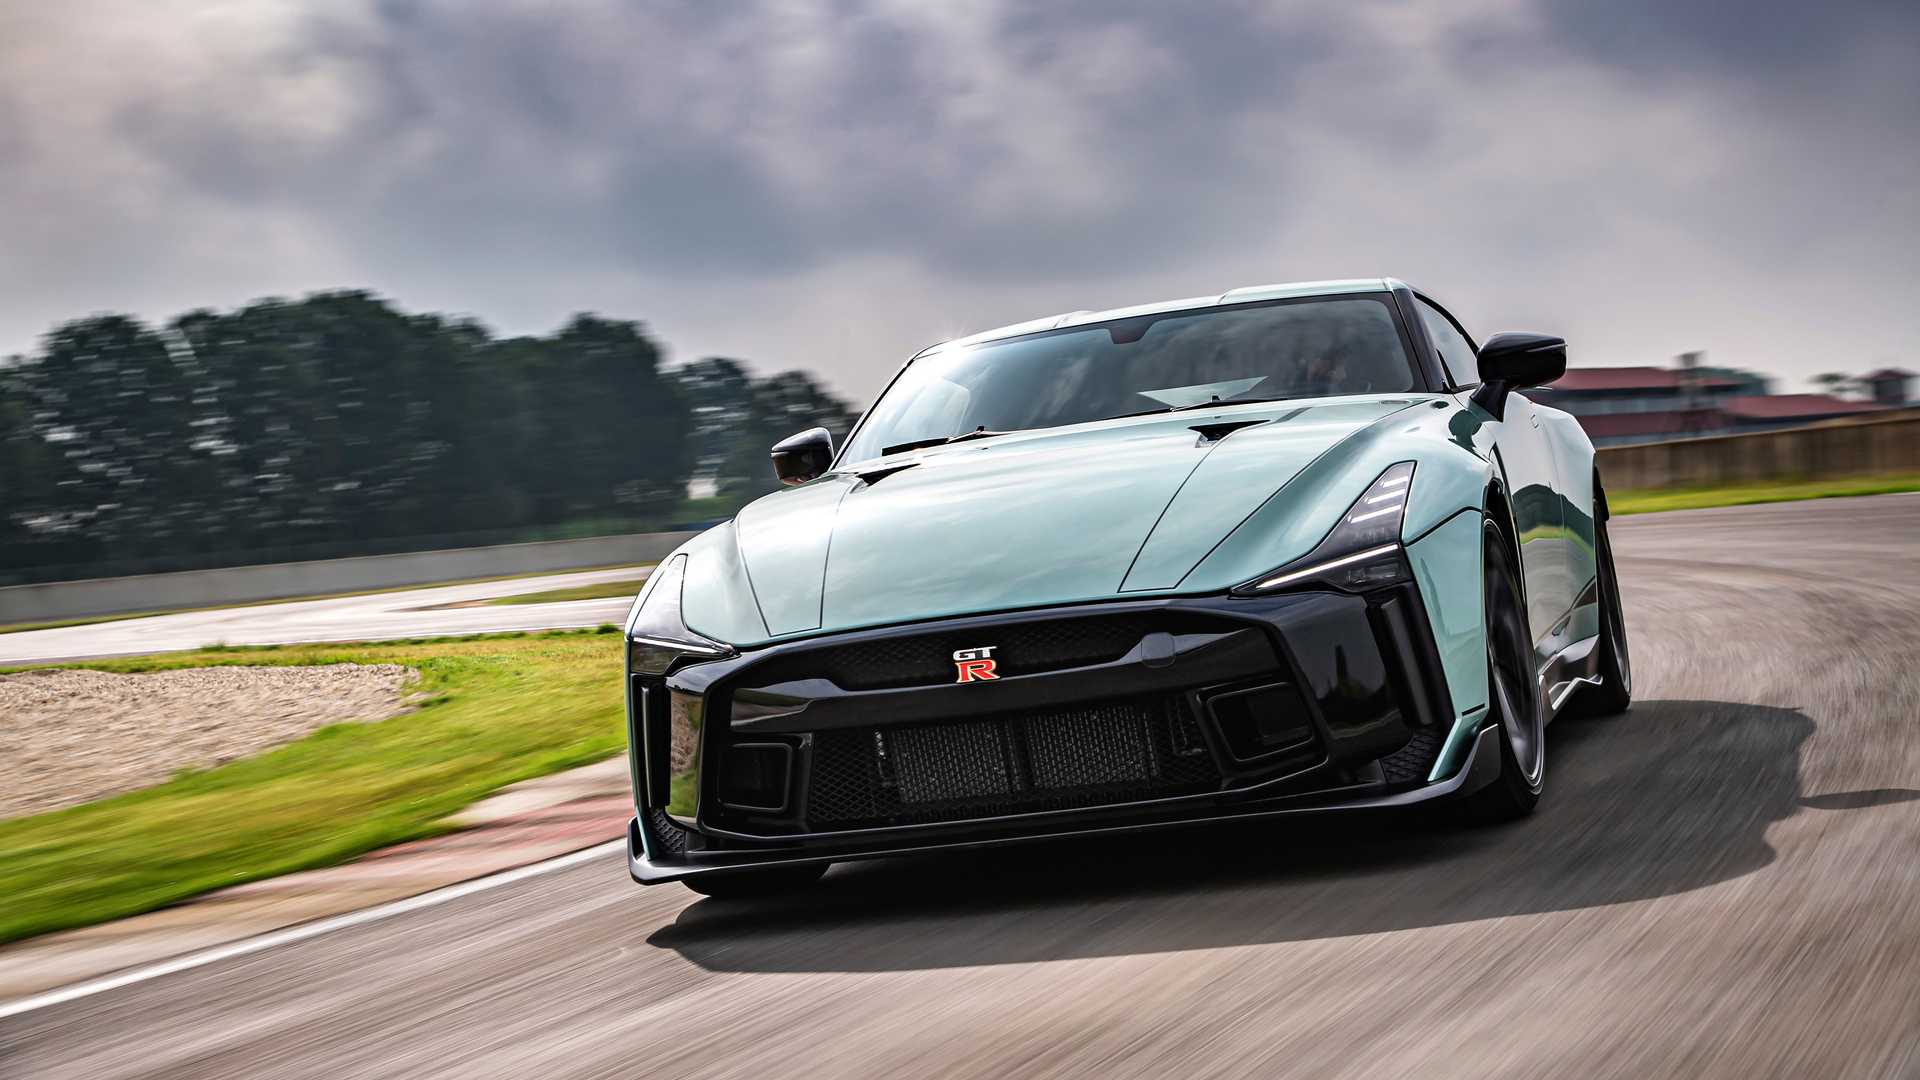 R36 Nissan Skyline GT-R design concept by Roman Miah and Avante Design - a  vision for the future 